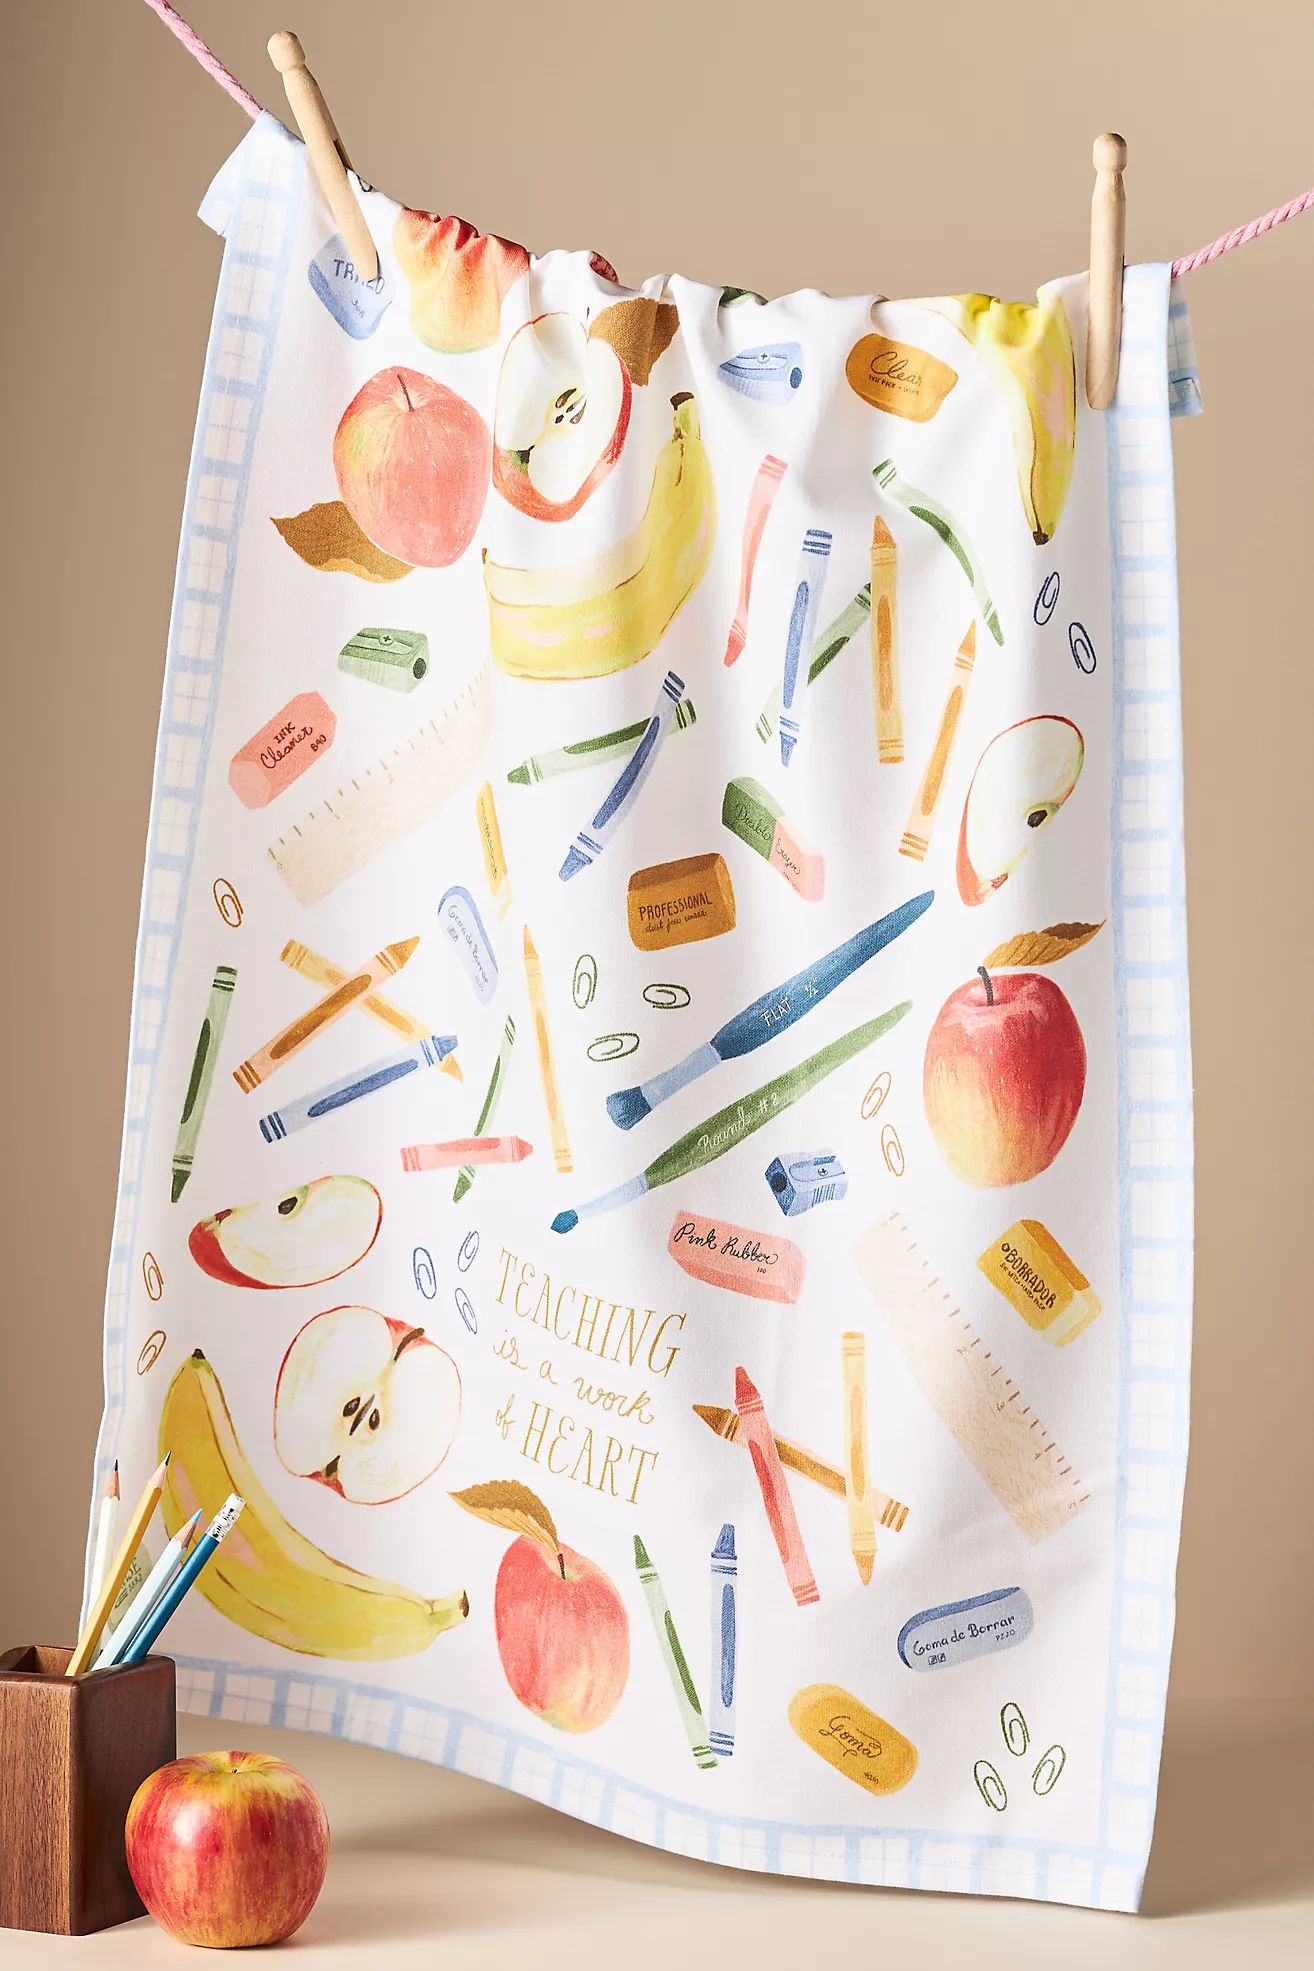 Teaching is a Work of Heart Dish Towel | Anthropologie (US)